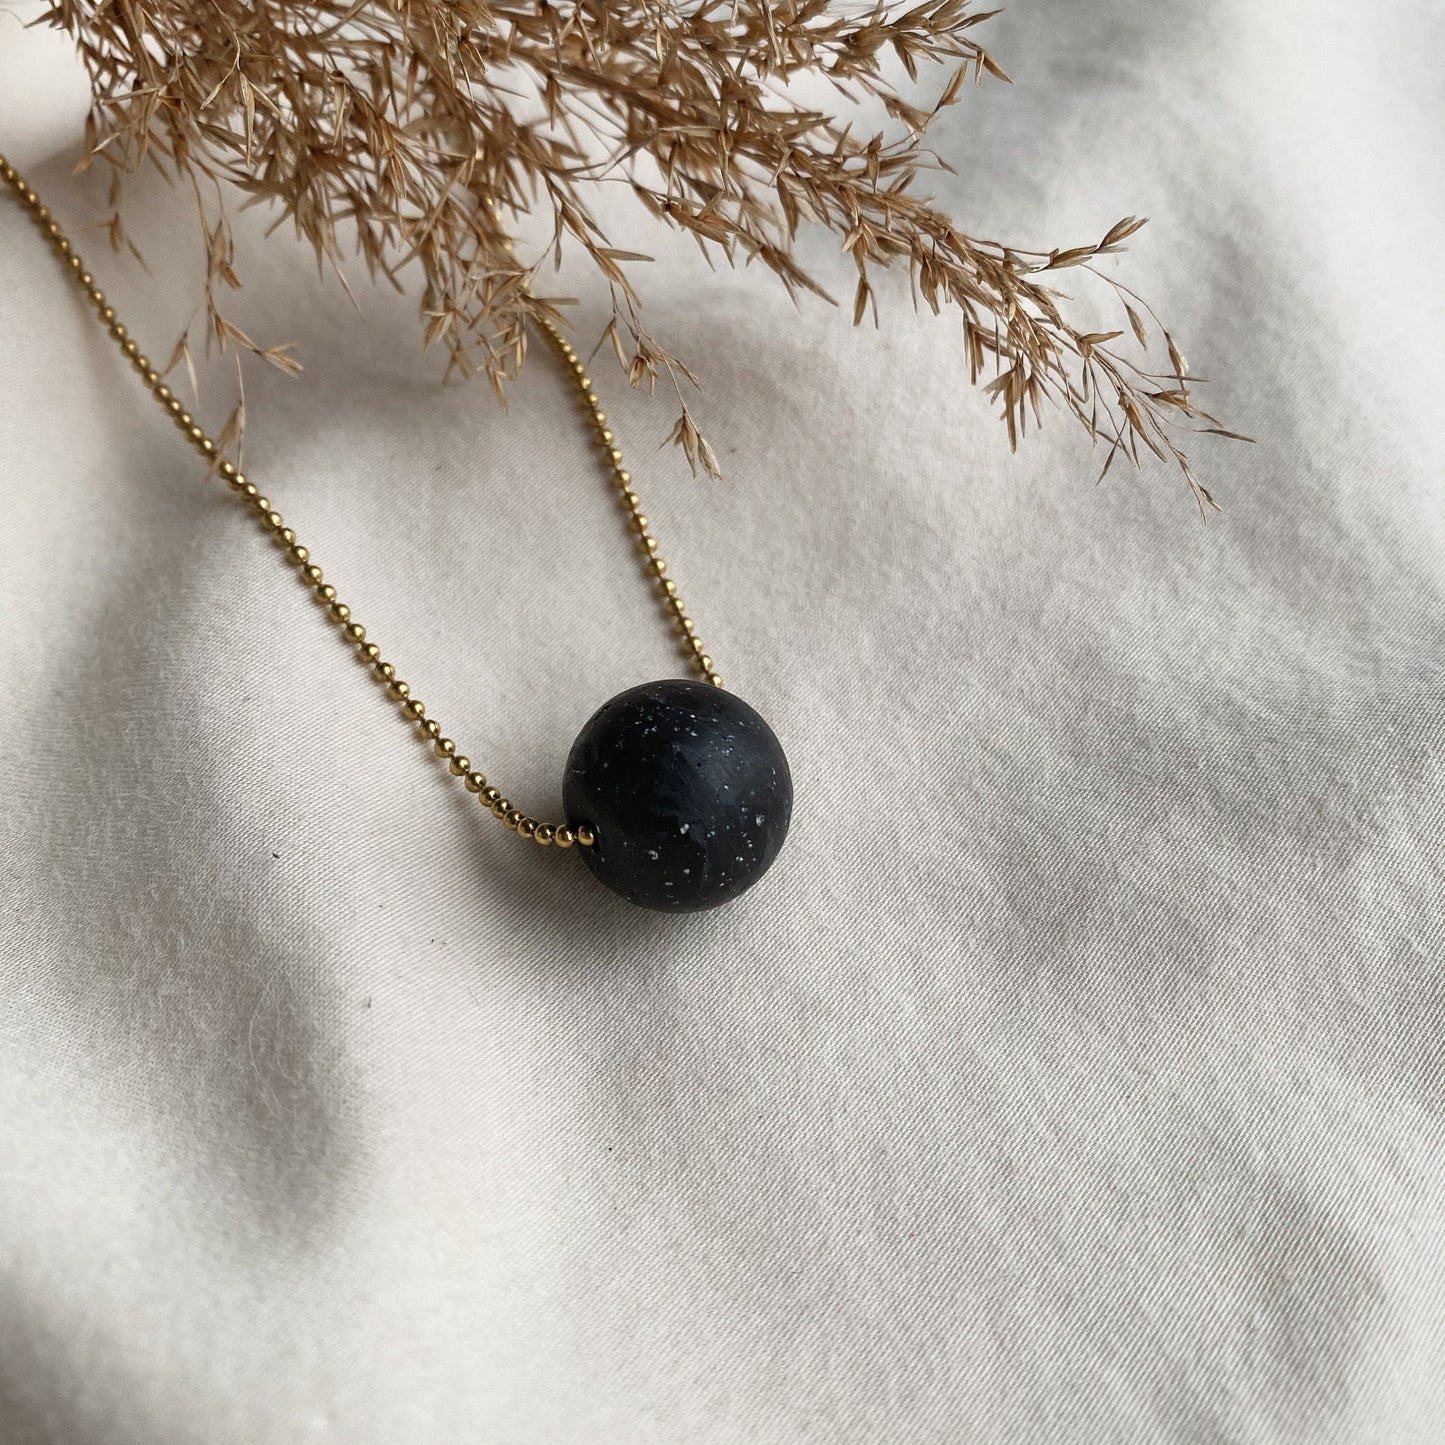 Concrete necklace | concrete jewelry | concrete bead 12mm | minimalist necklace | stainless steel ball chain | brass ball chain